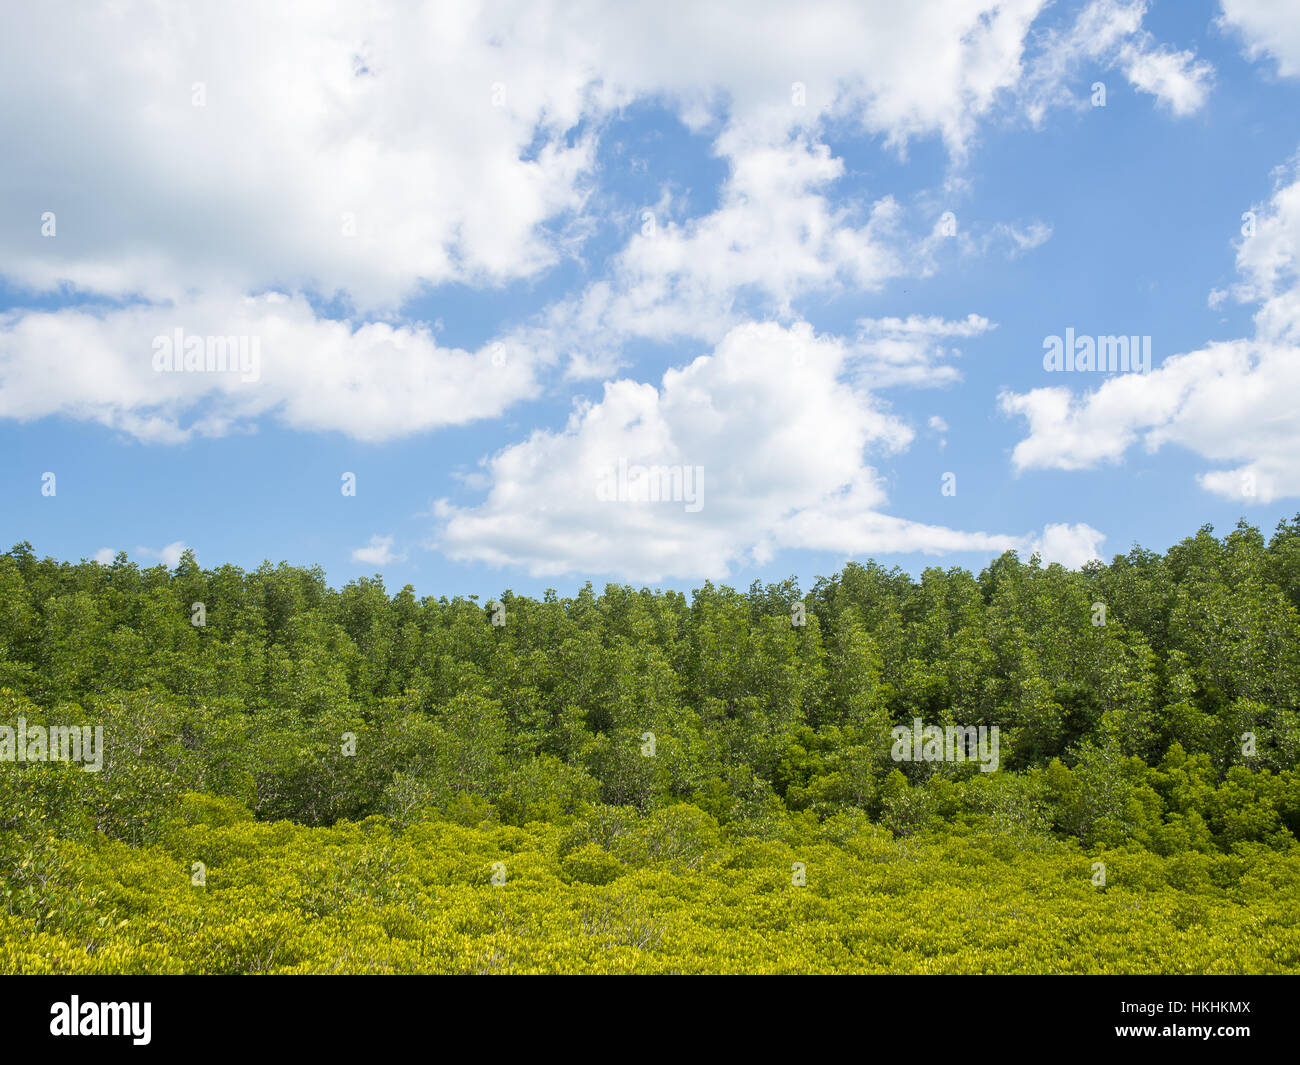 Landscape with green and yellow tiny trees blurred foreground in cloudy skies day Stock Photo